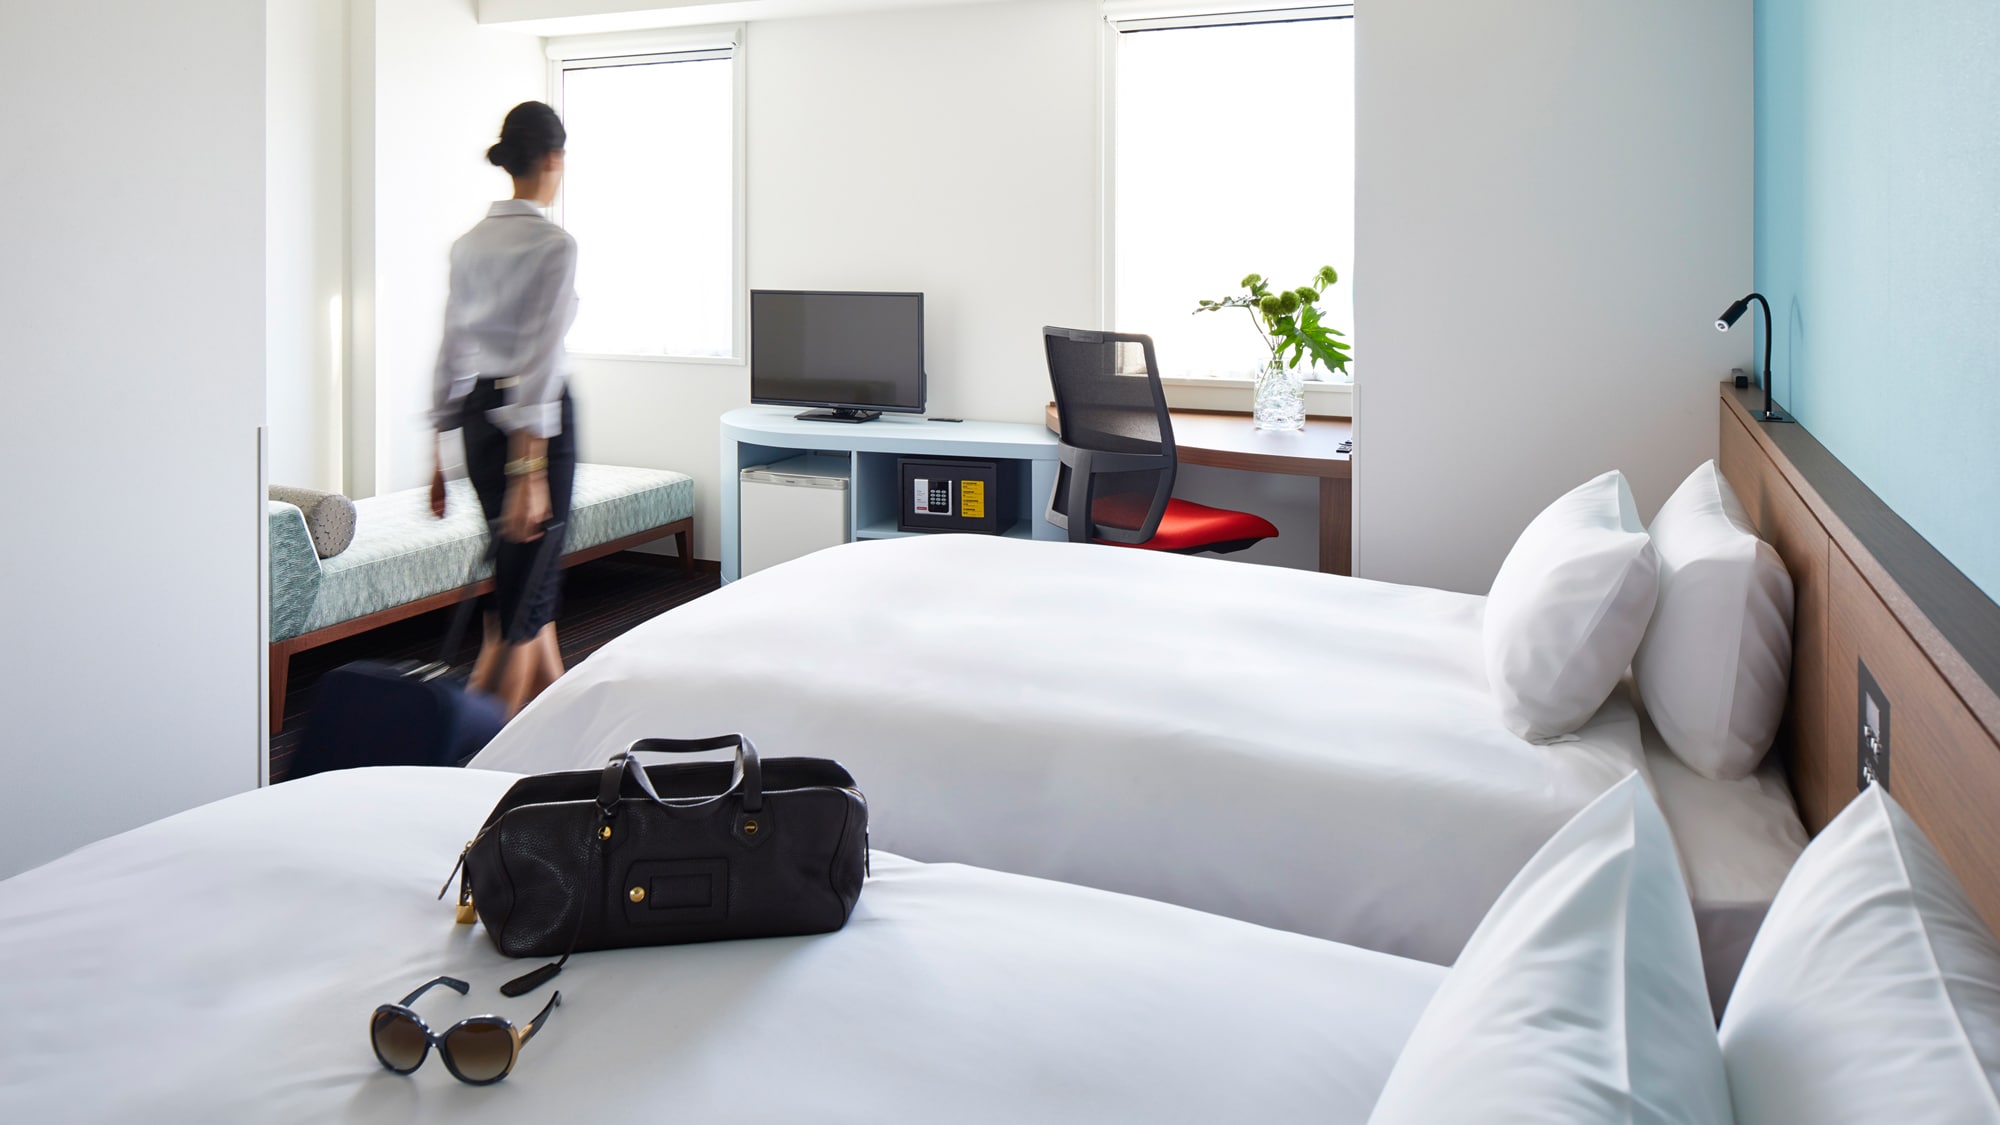 The spacious twin room is equipped with a comfortable chair and is ideal for telework.